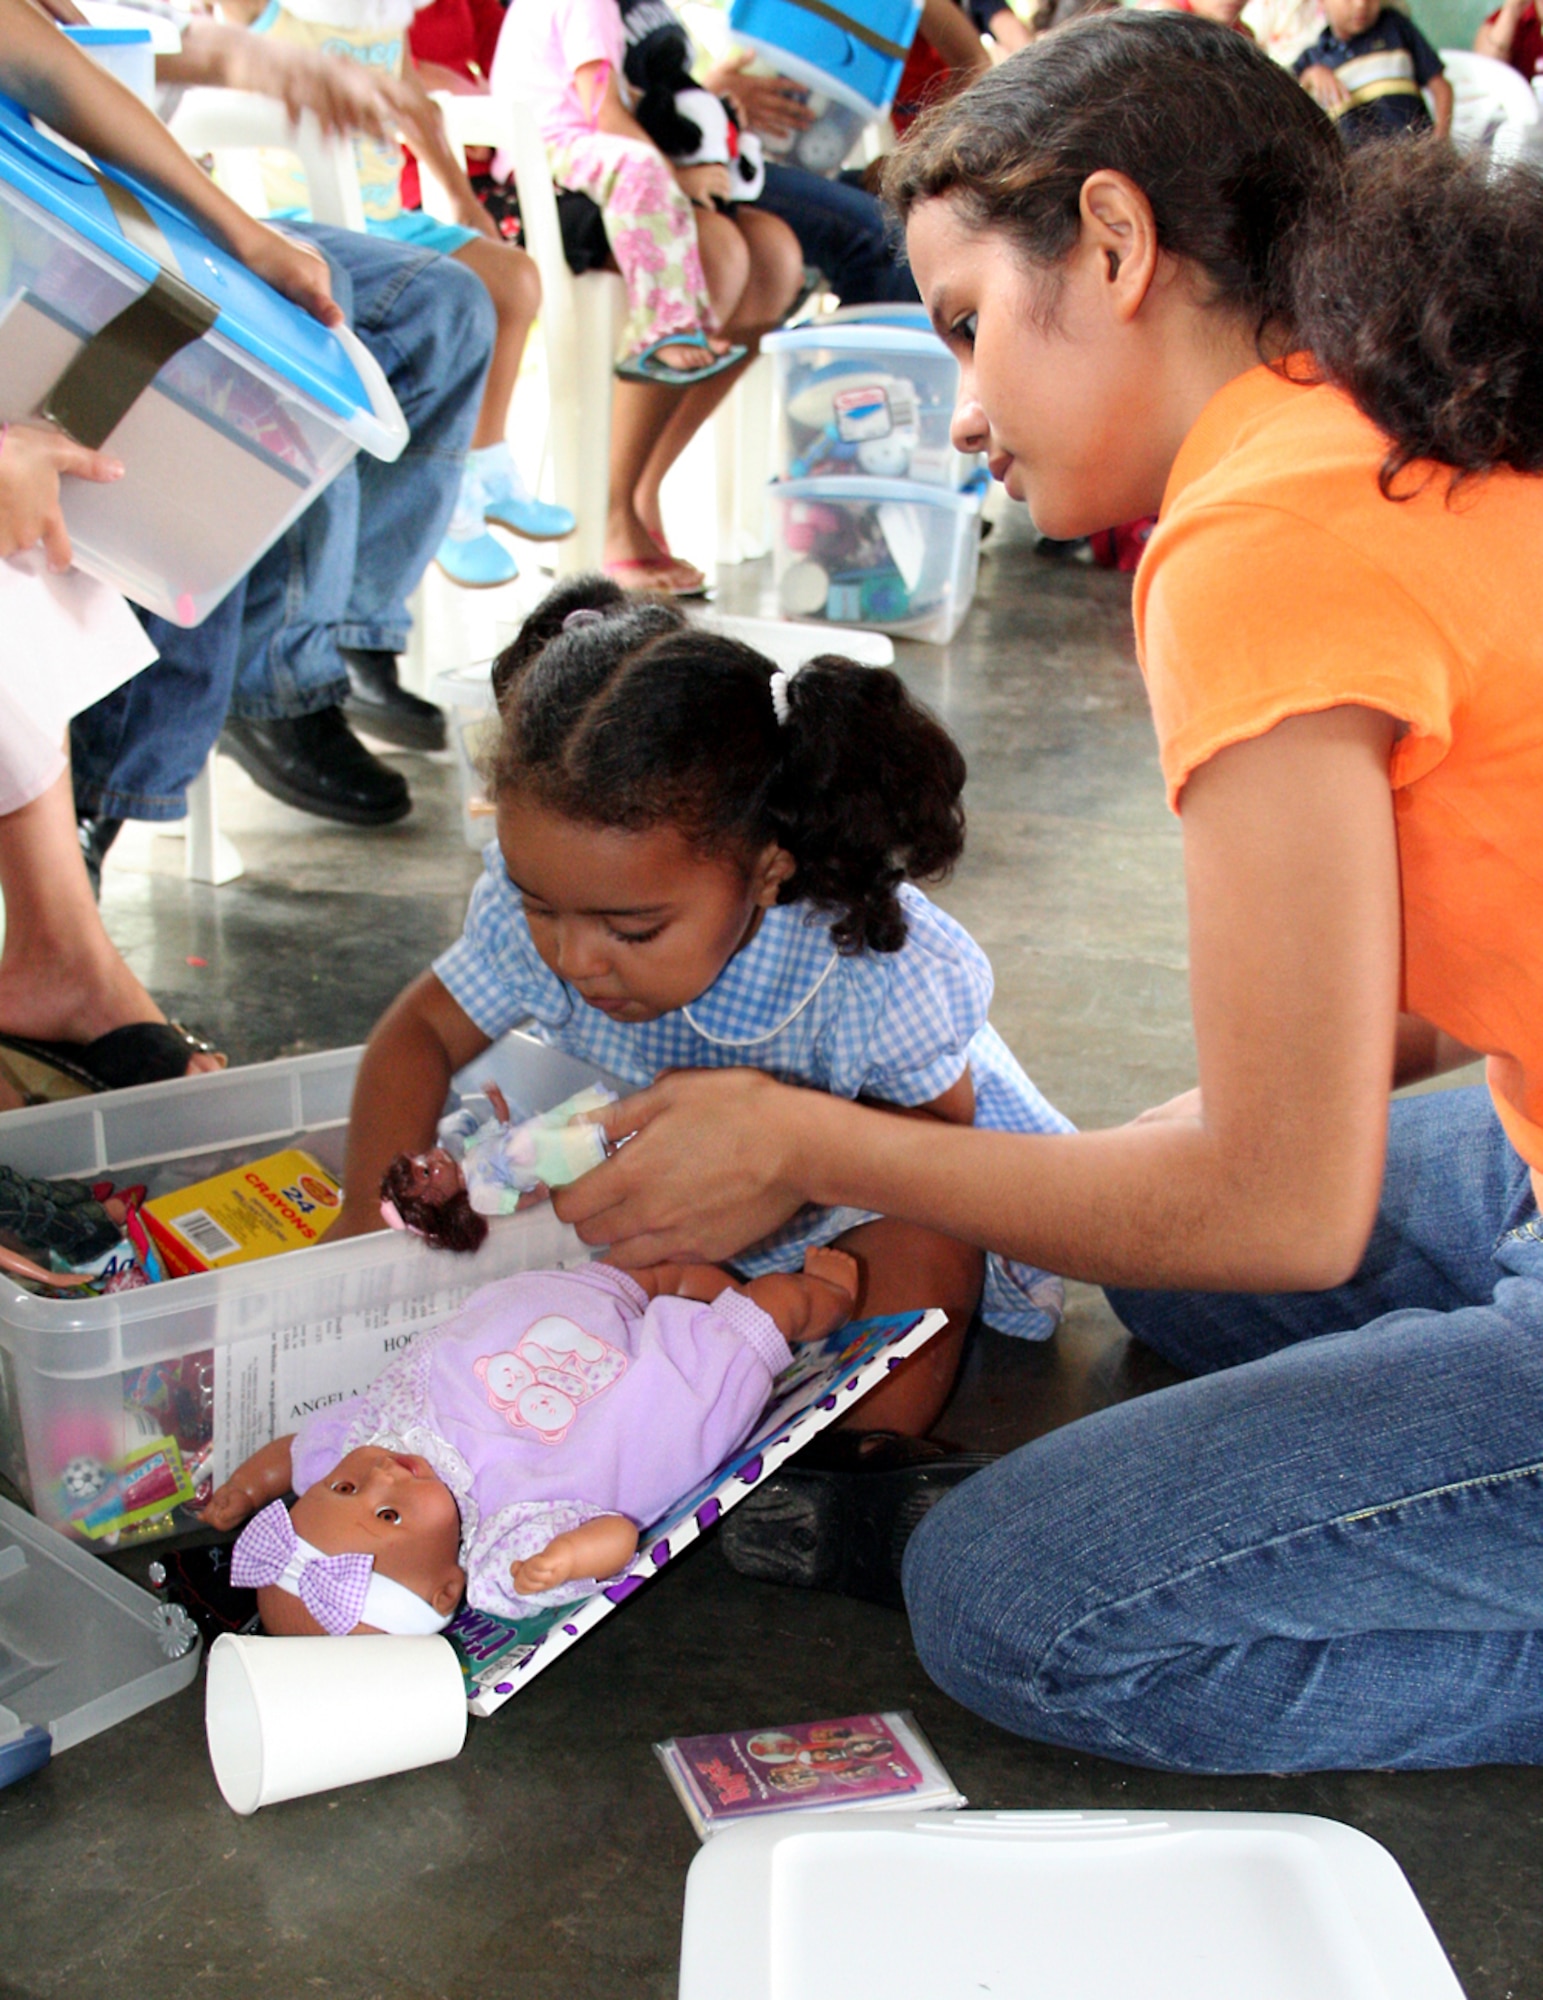 A young girl excitedly opens her box of goodies after receiving it from Santa Claus at Aldea Infantil SOS de La Ceiba, Honduras. (U.S. Air Force photo by Senior Airman Heidi Davis) 